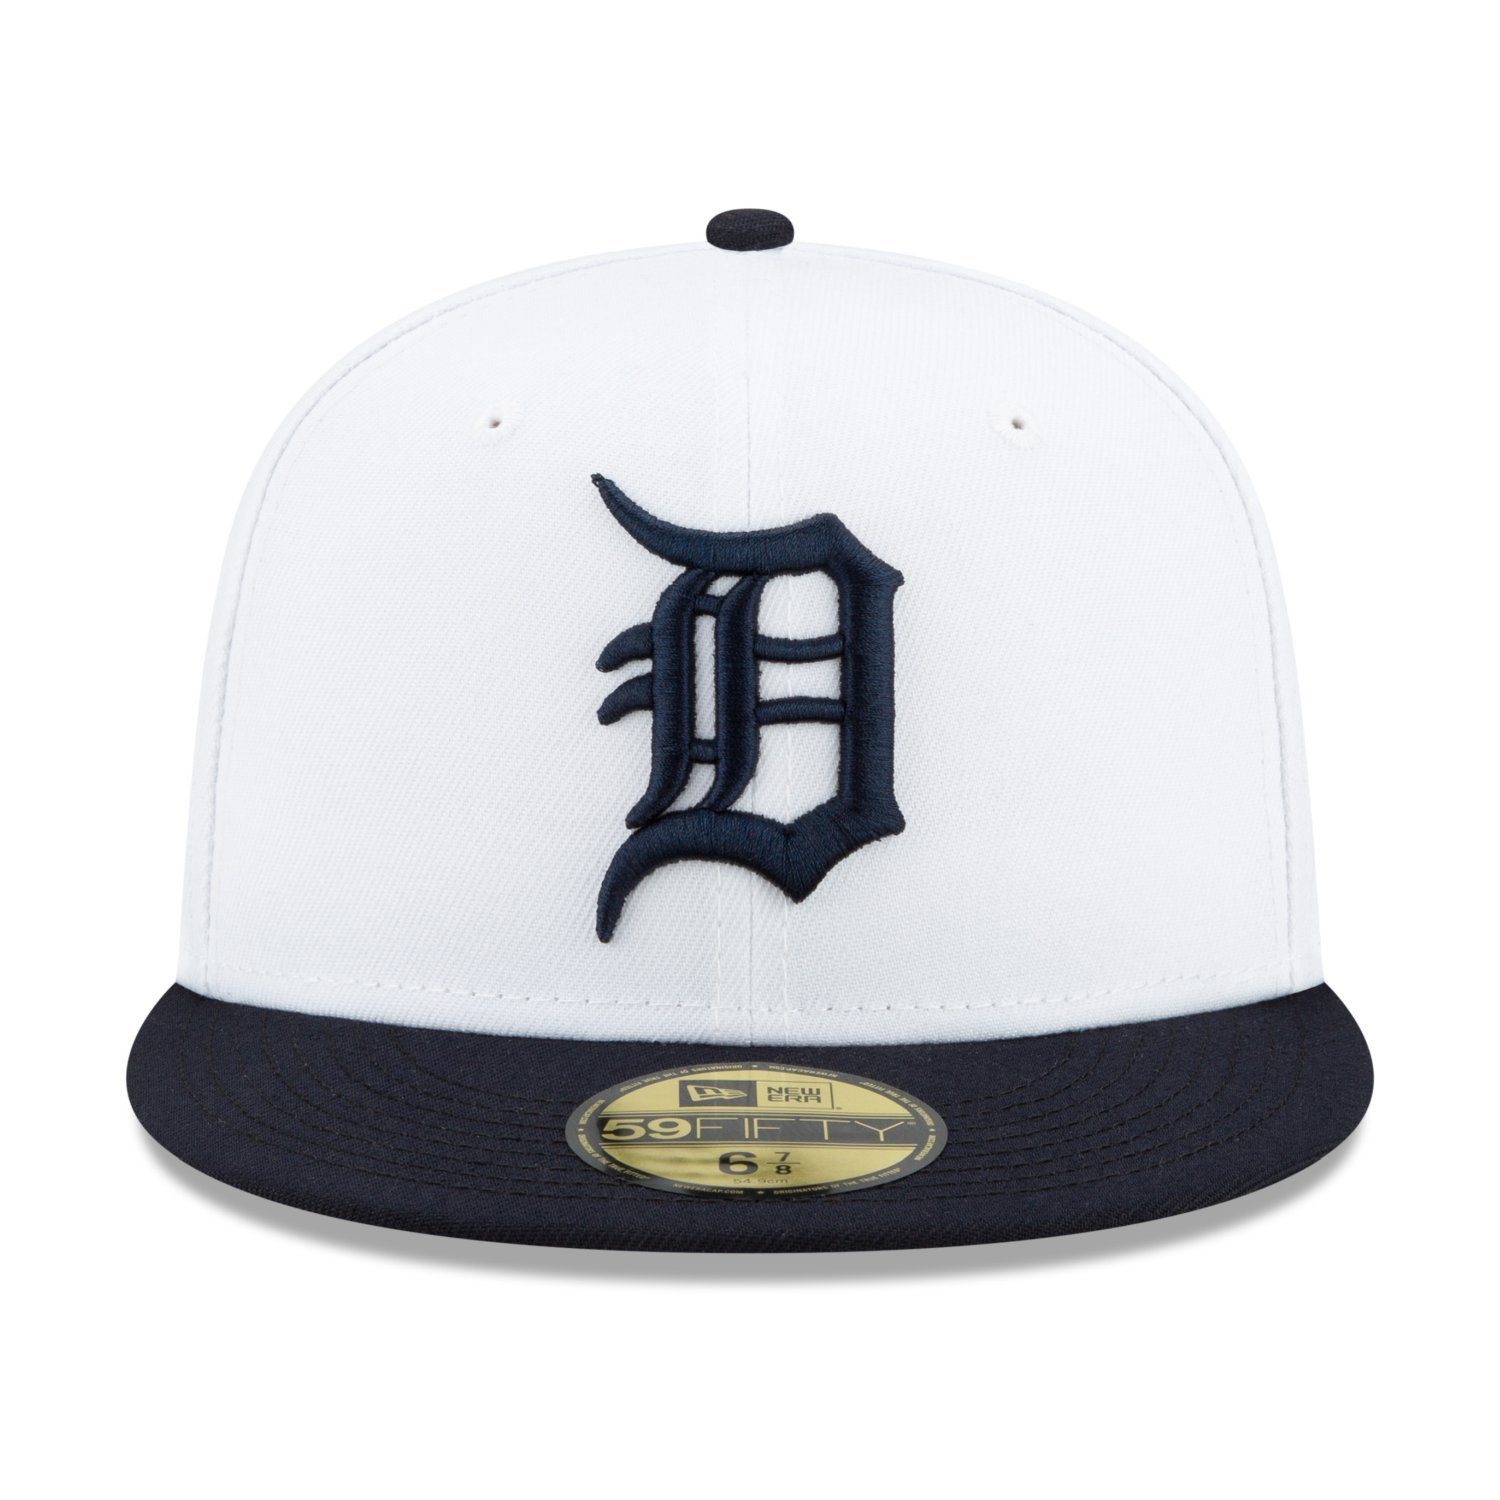 Era New WORLD Detroit 1984 Fitted Tigers Cap SERIES 59Fifty